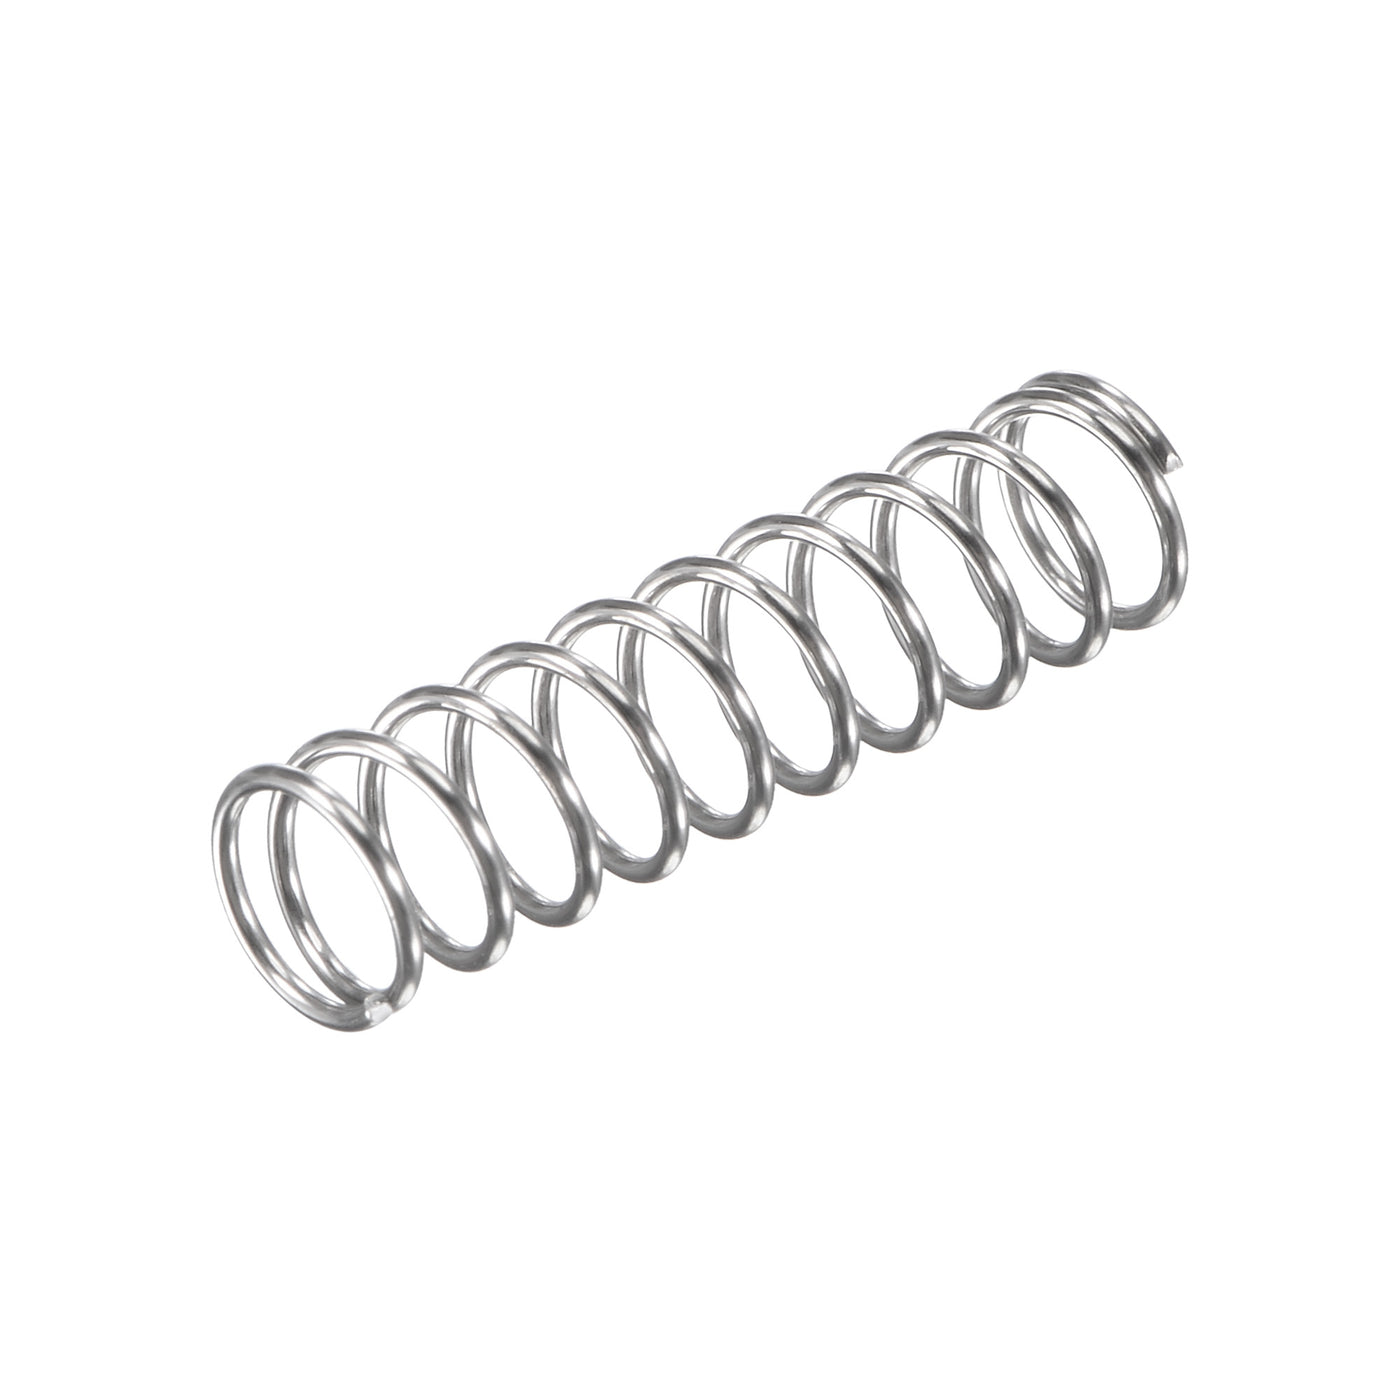 uxcell Uxcell 8mmx0.8mmx30mm 304 Stainless Steel Compression Spring 11.8N Load Capacity 10pcs